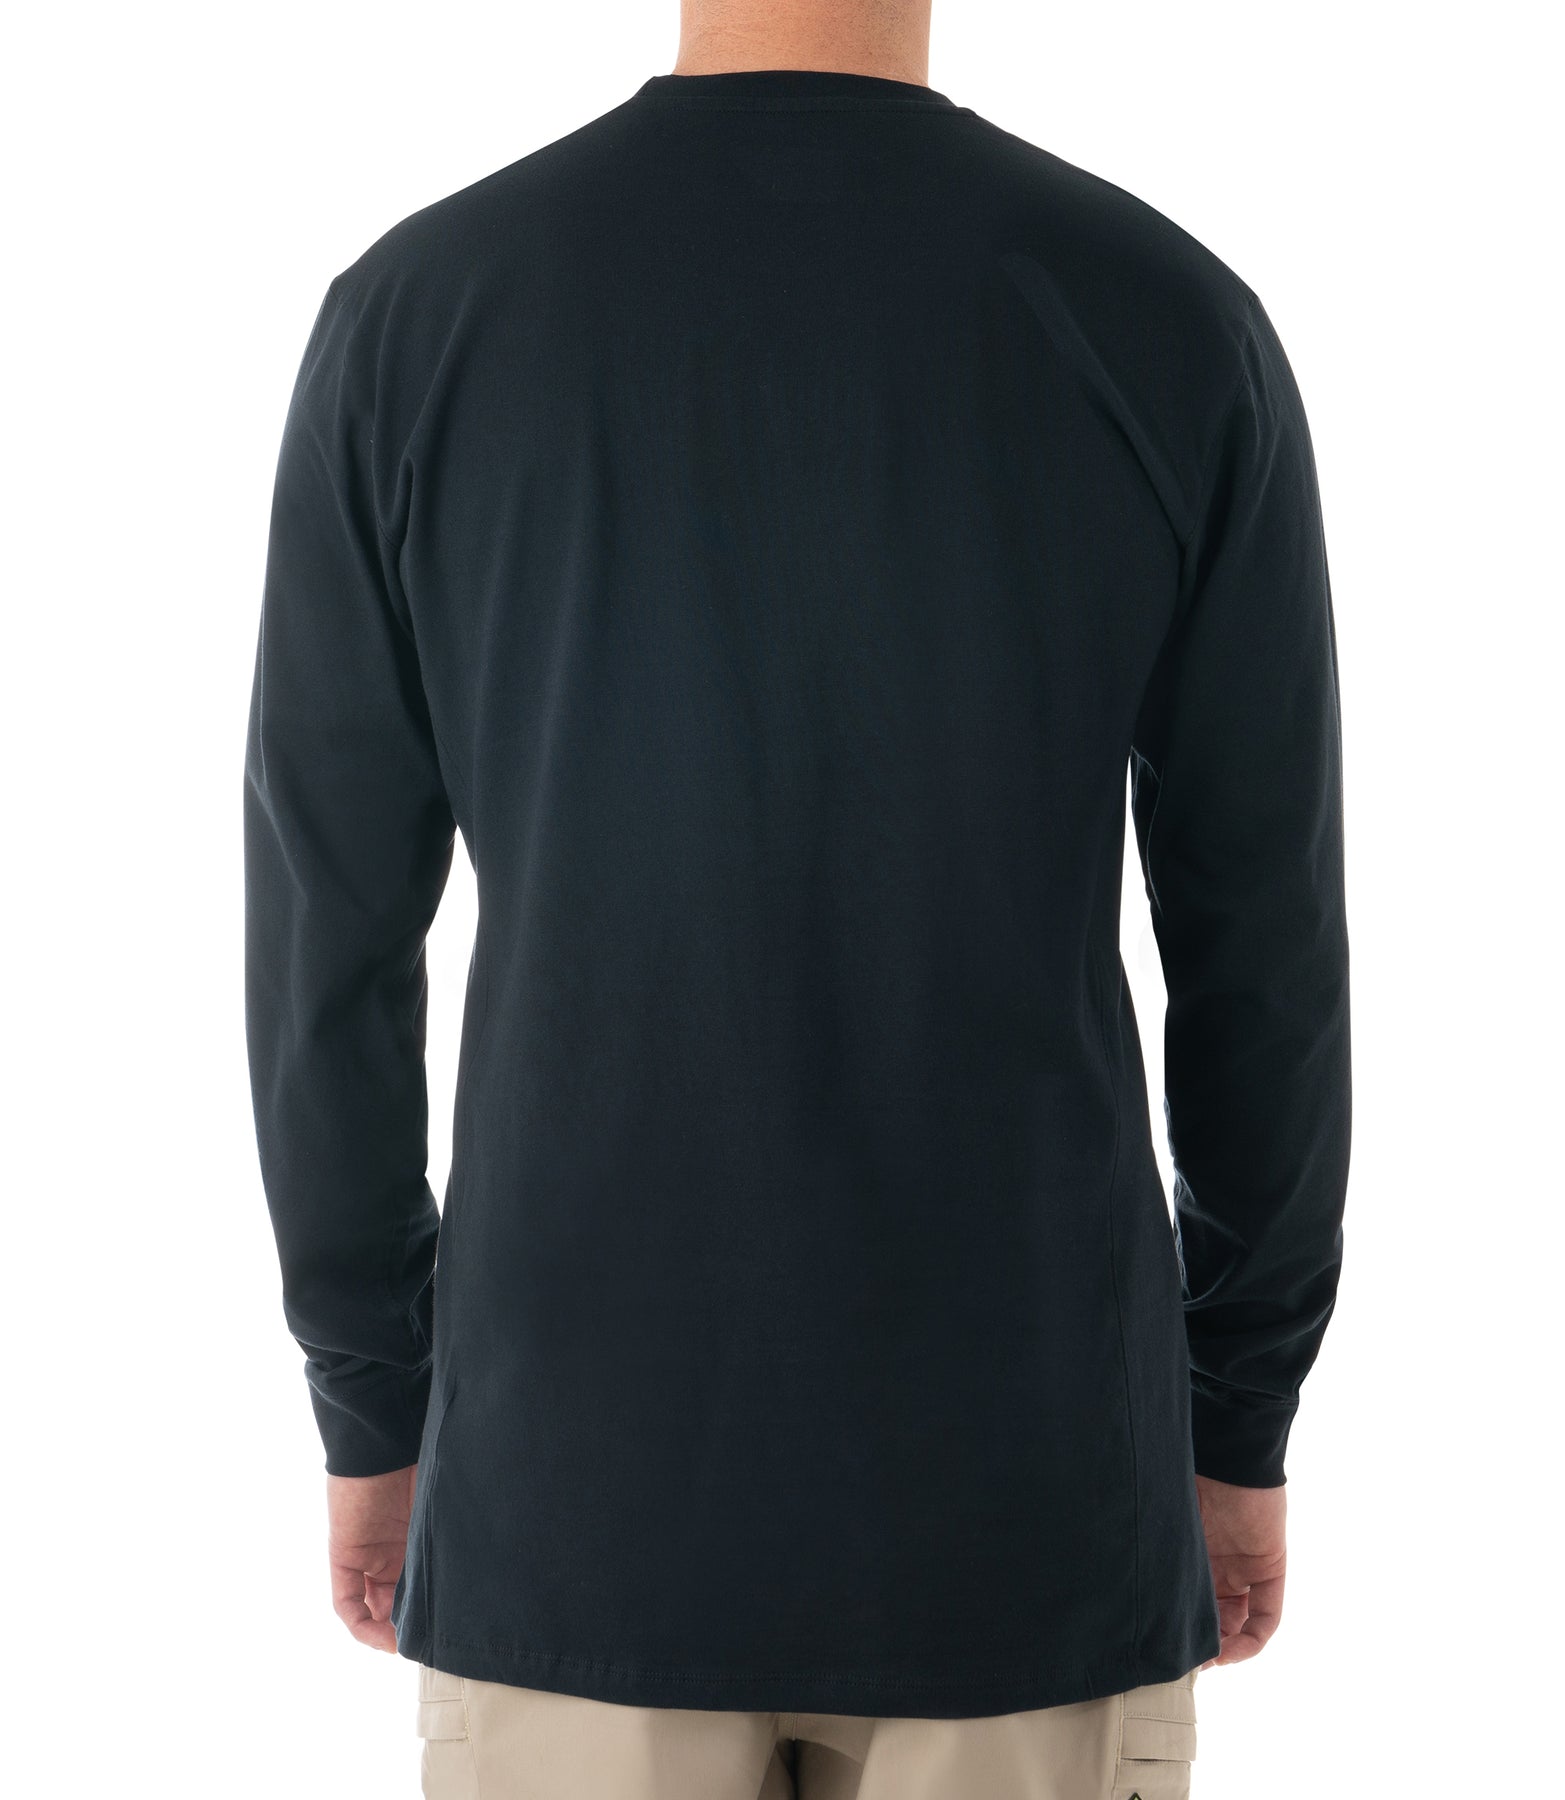 Men's Tactix Cotton Long Sleeve T-Shirt with Chest Pocket – First Tactical